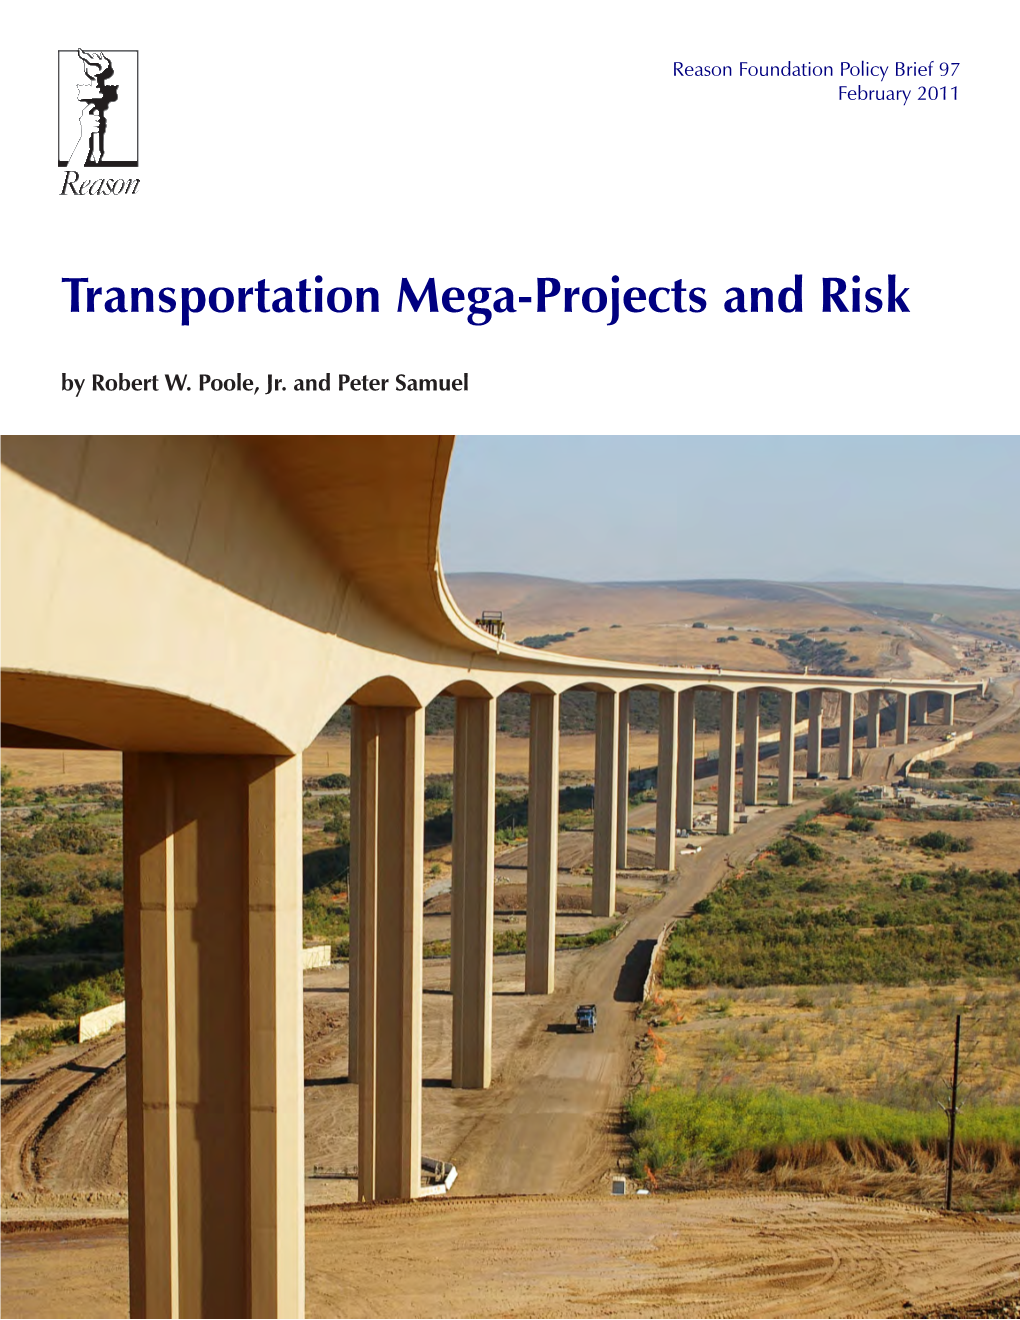 Transportation Mega-Projects and Risk by Robert W